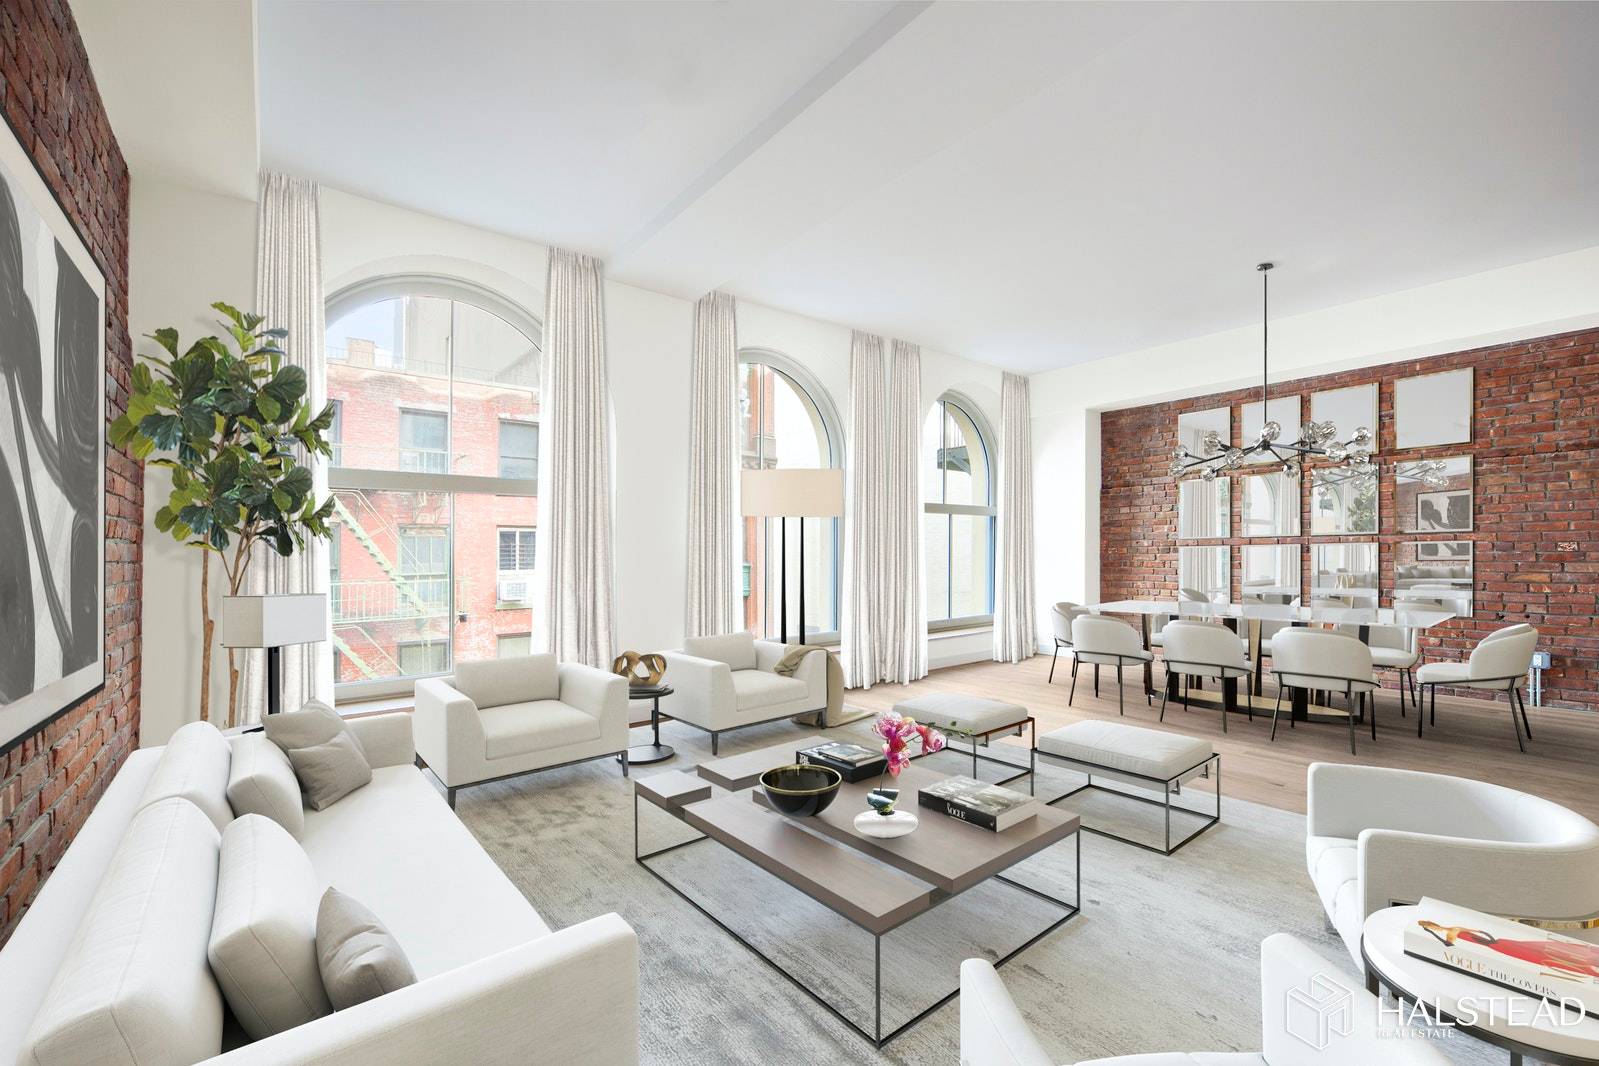 Move right into this mint and beautifully designed 1, 397 square foot condominium loft located in Tribeca's vibrant East Historic District featuring light filled rooms and superb luxury finishes throughout ...